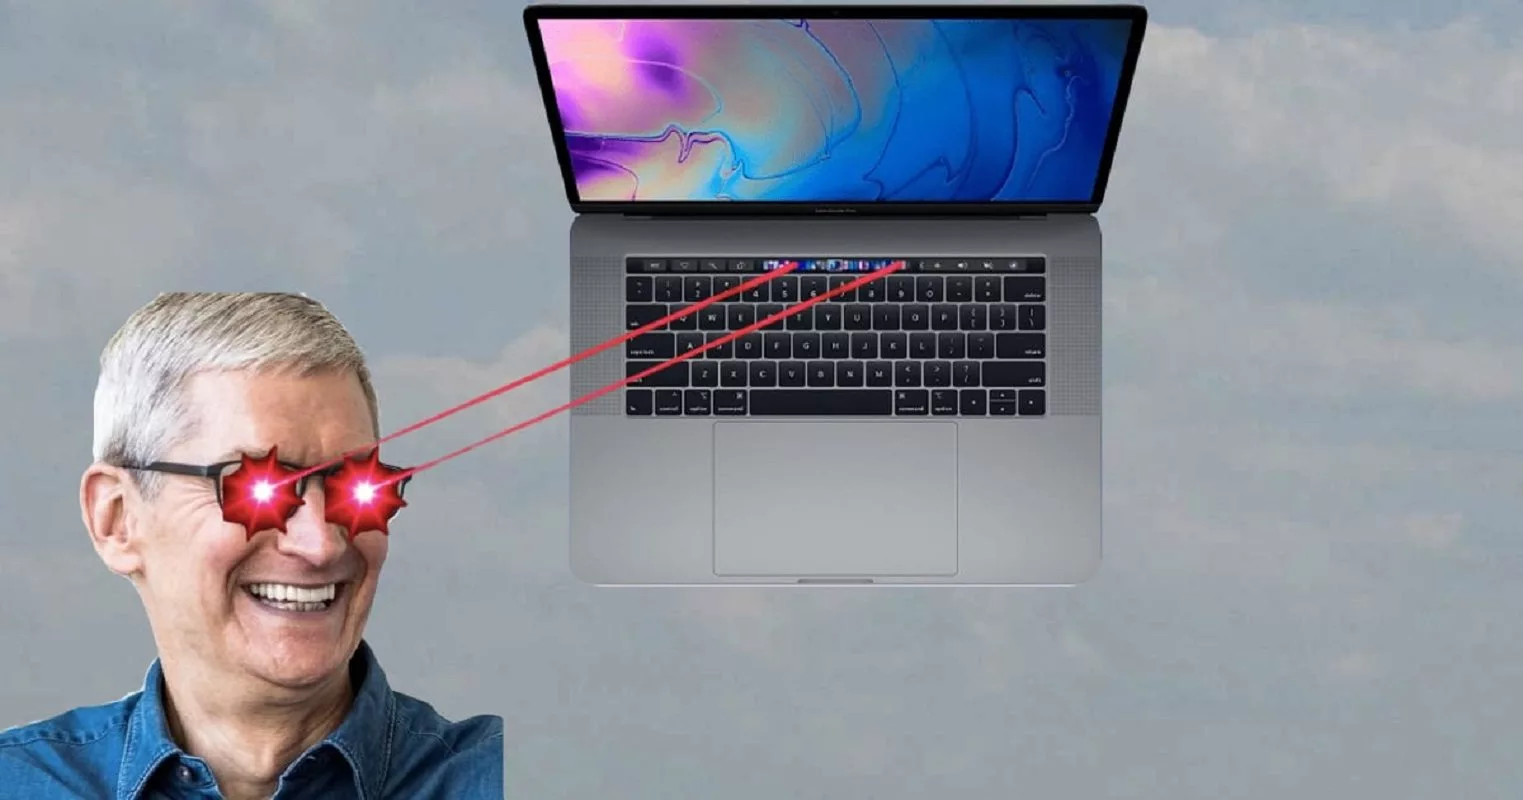 On new MacBooks, the touch bar was completely discontinued after seven years